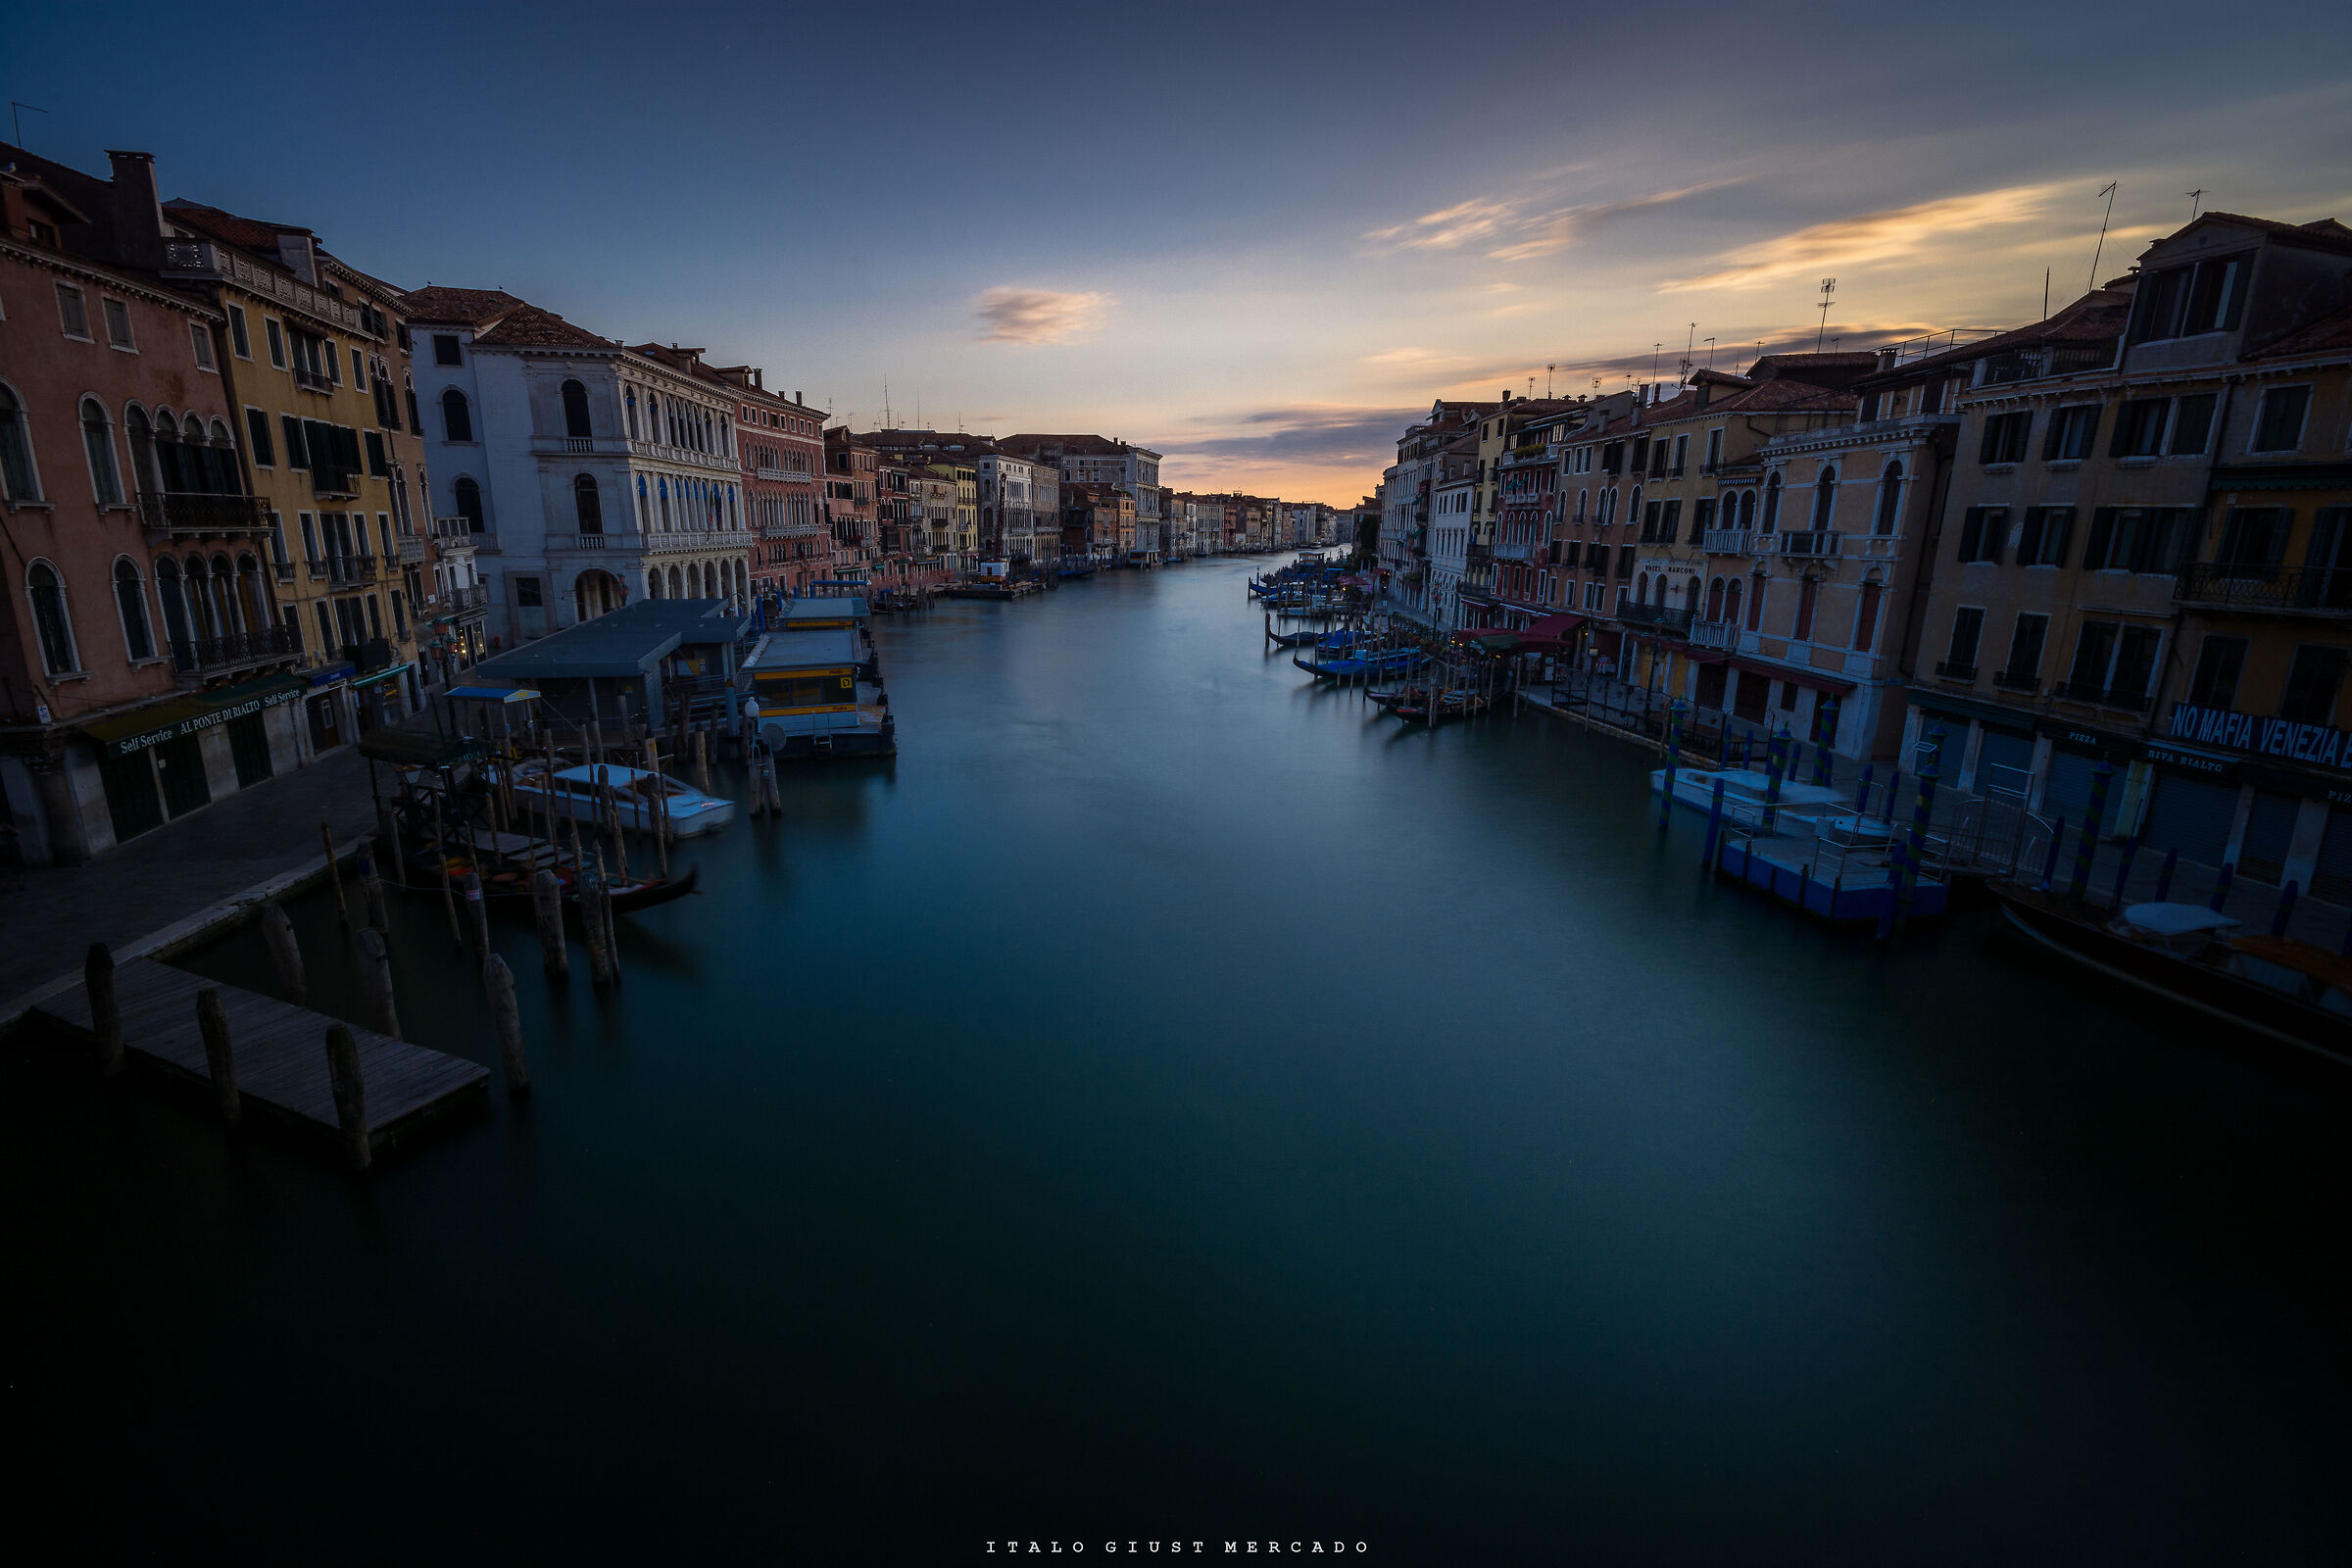 Quiet on the Grand Canal ...